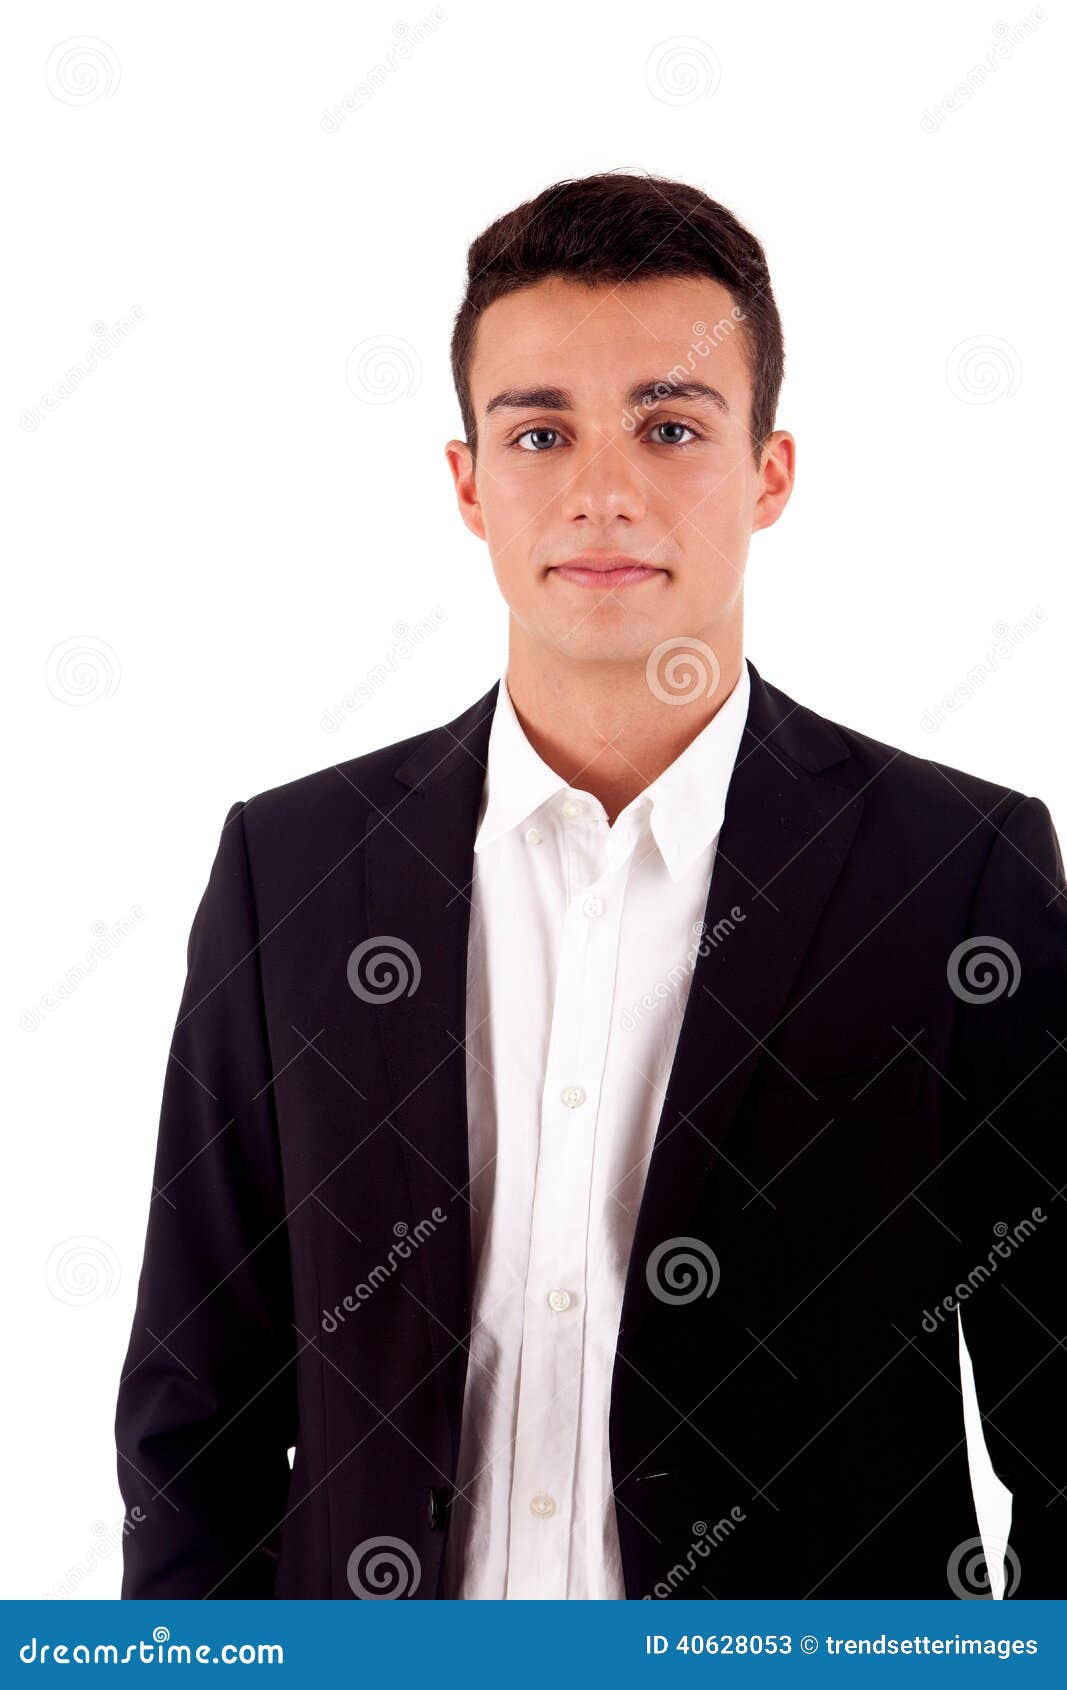 Man over white background stock image. Image of adult - 40628053